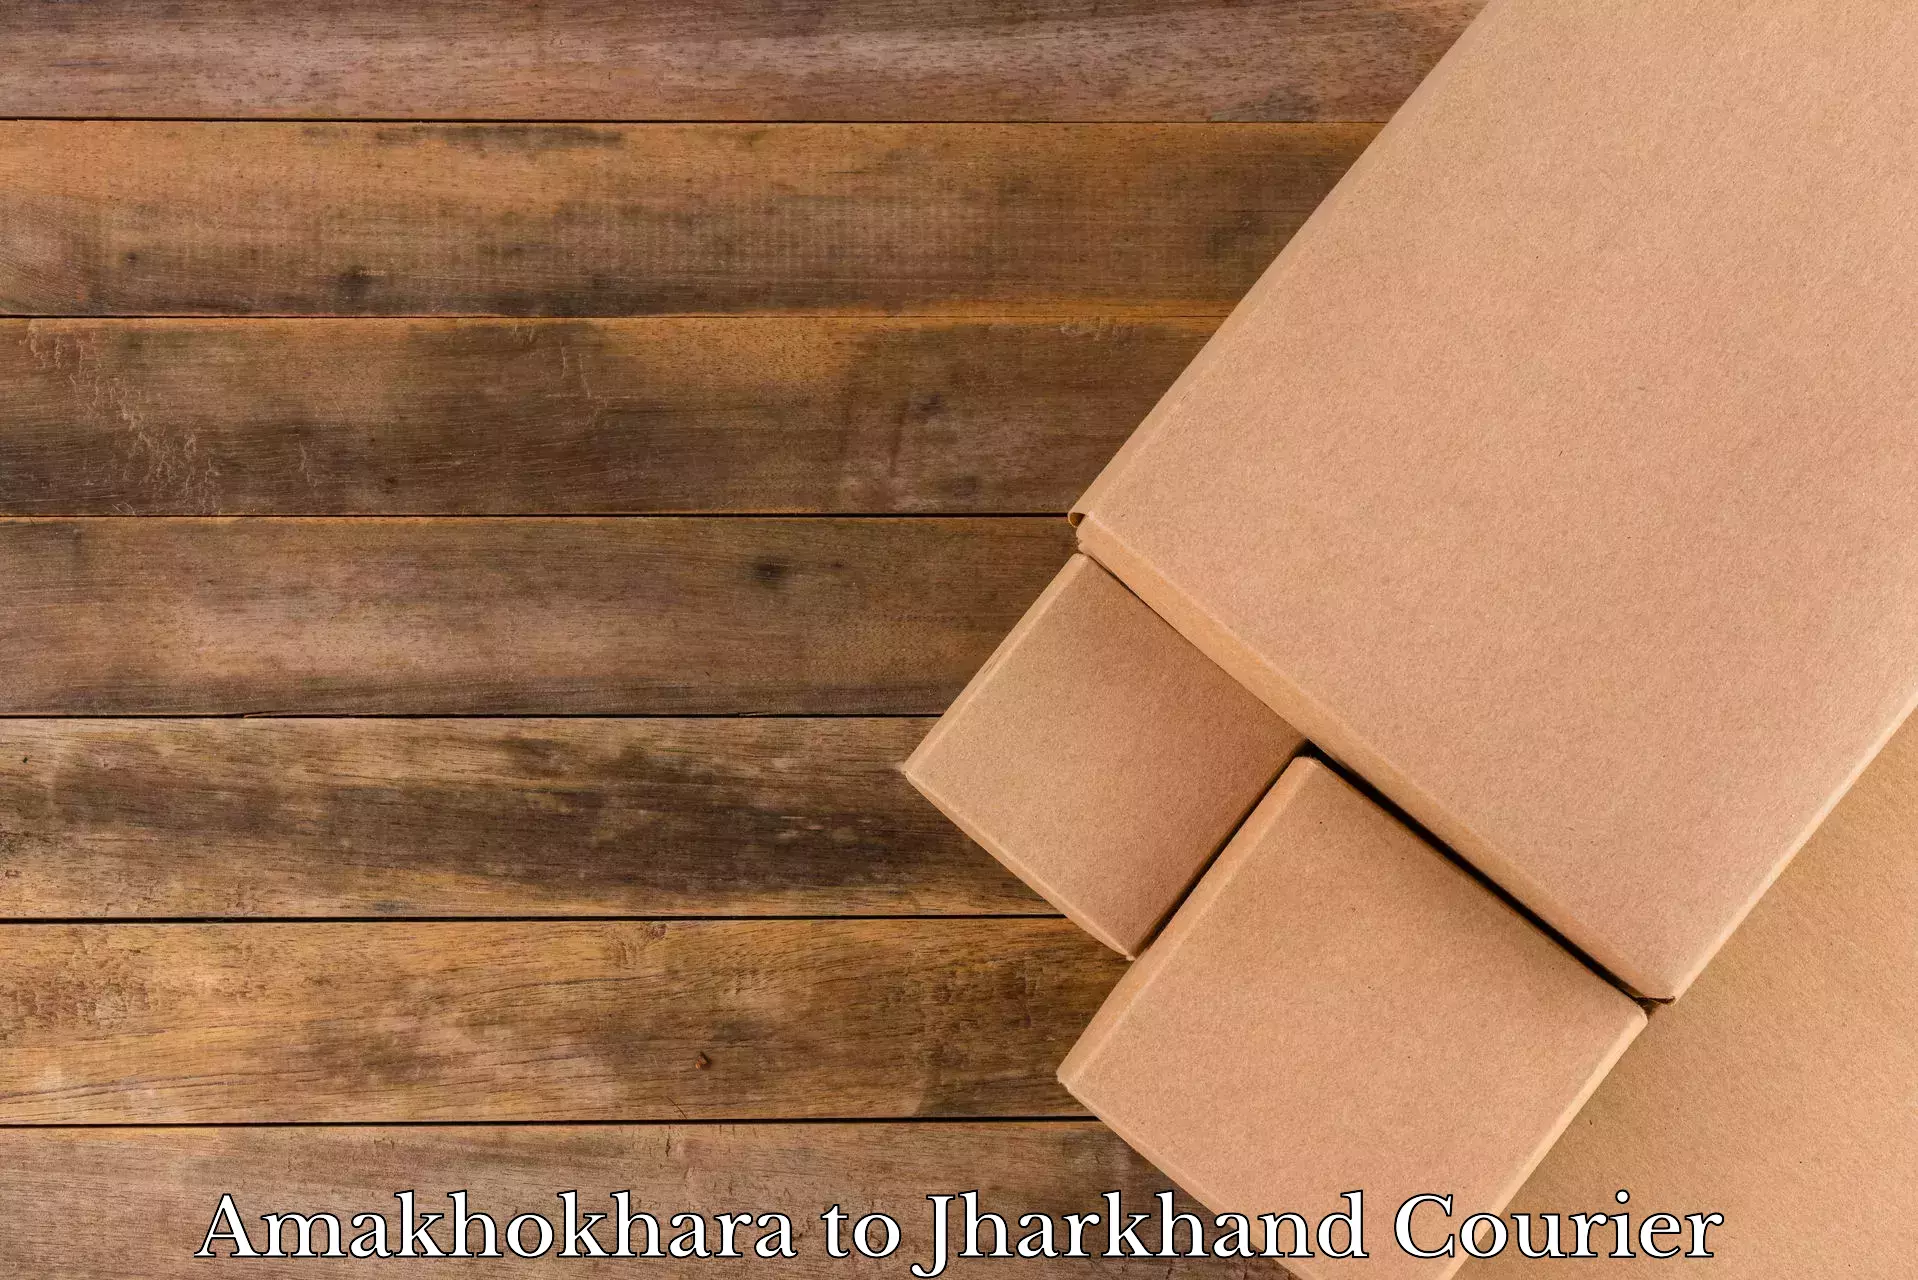 Furniture delivery service Amakhokhara to Topchanchi